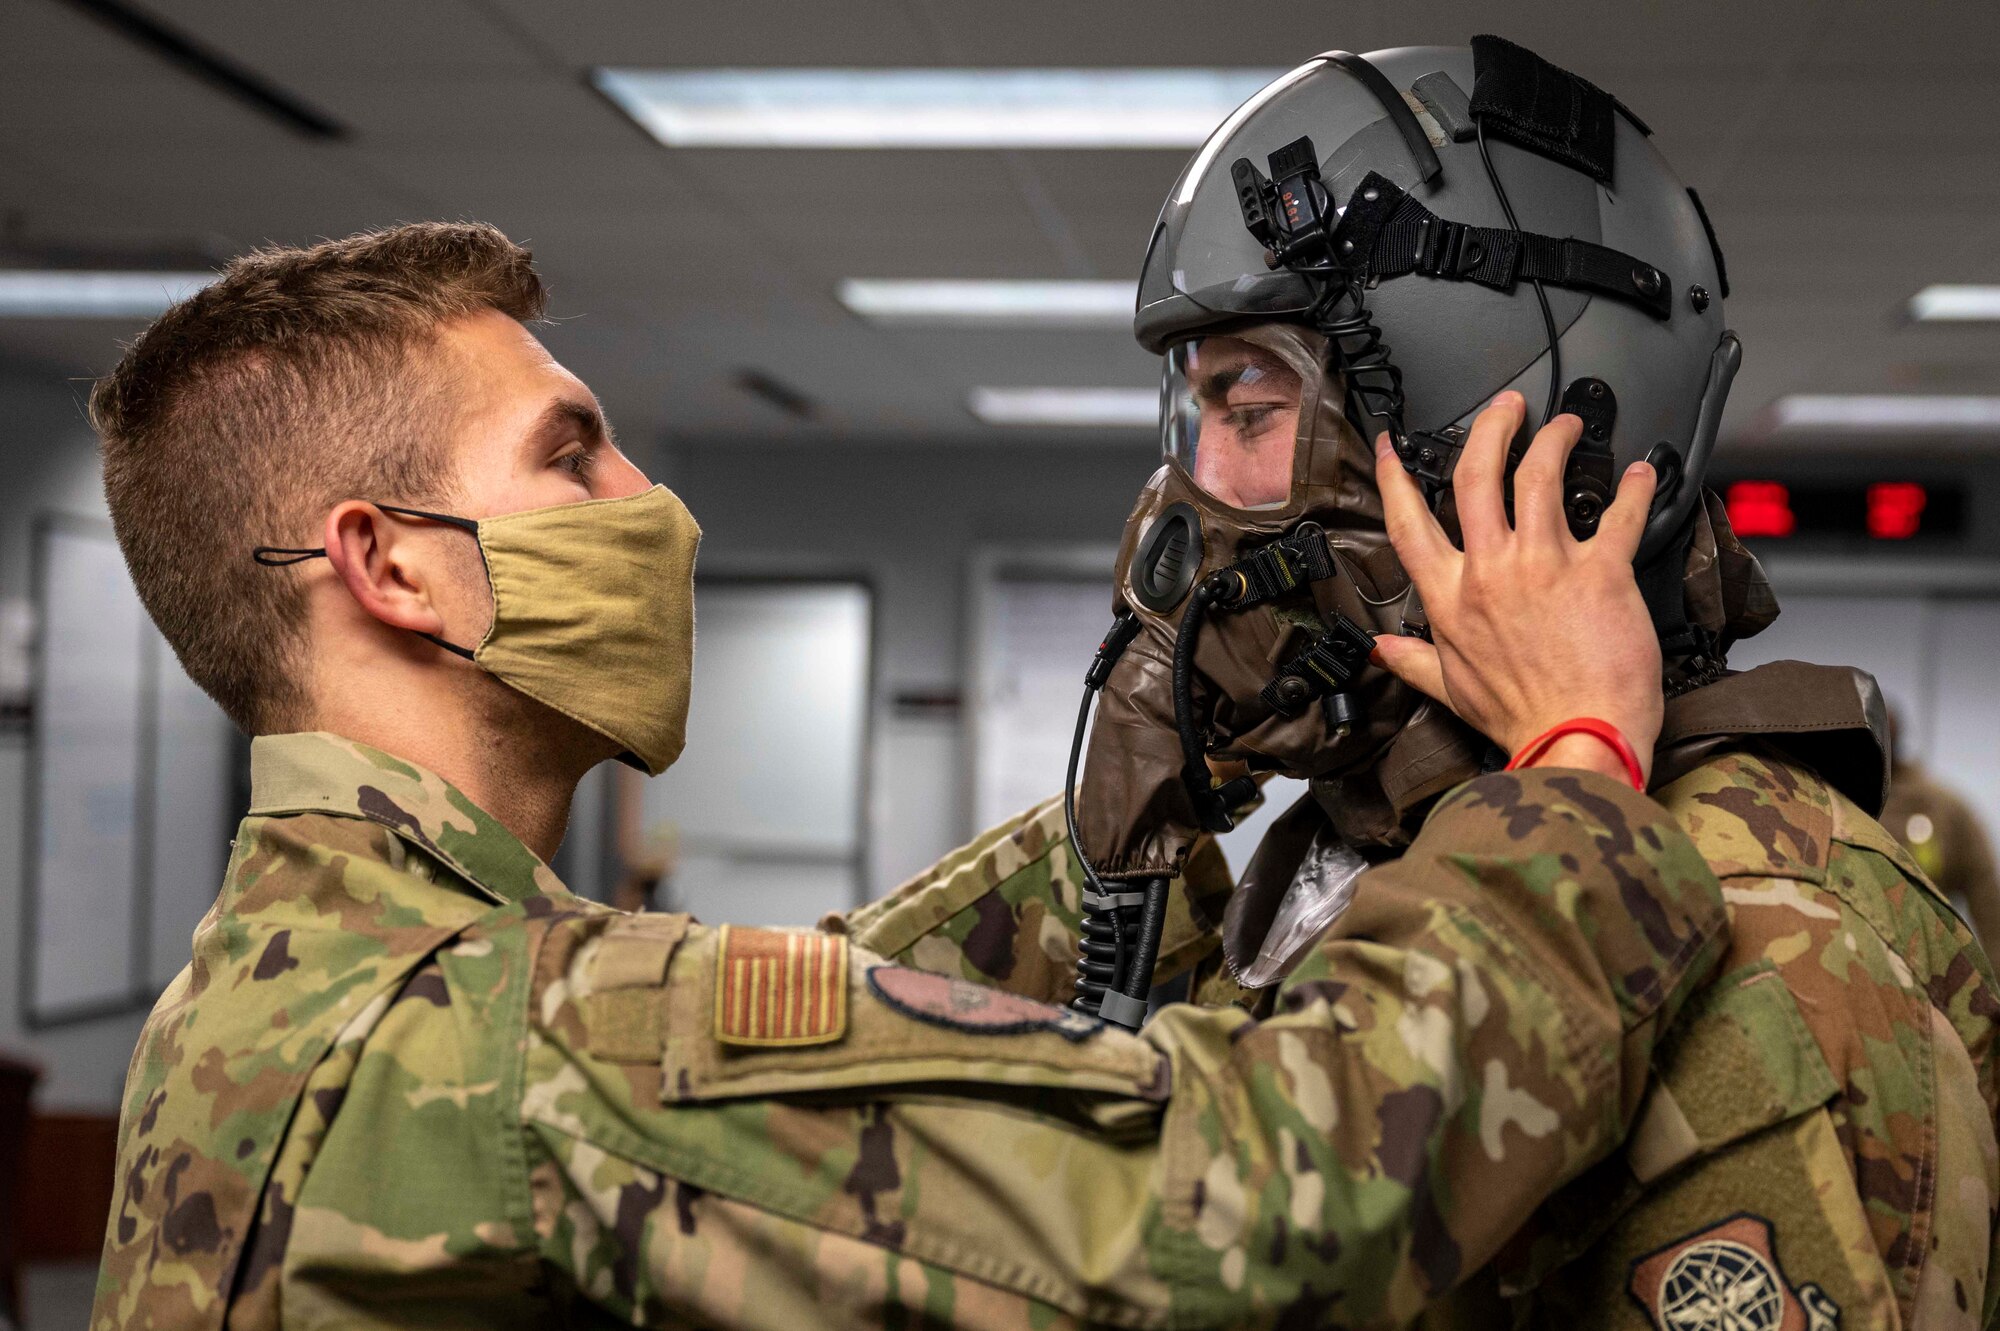 A member from AFE assists a loadmaster in donning AERPS gear.